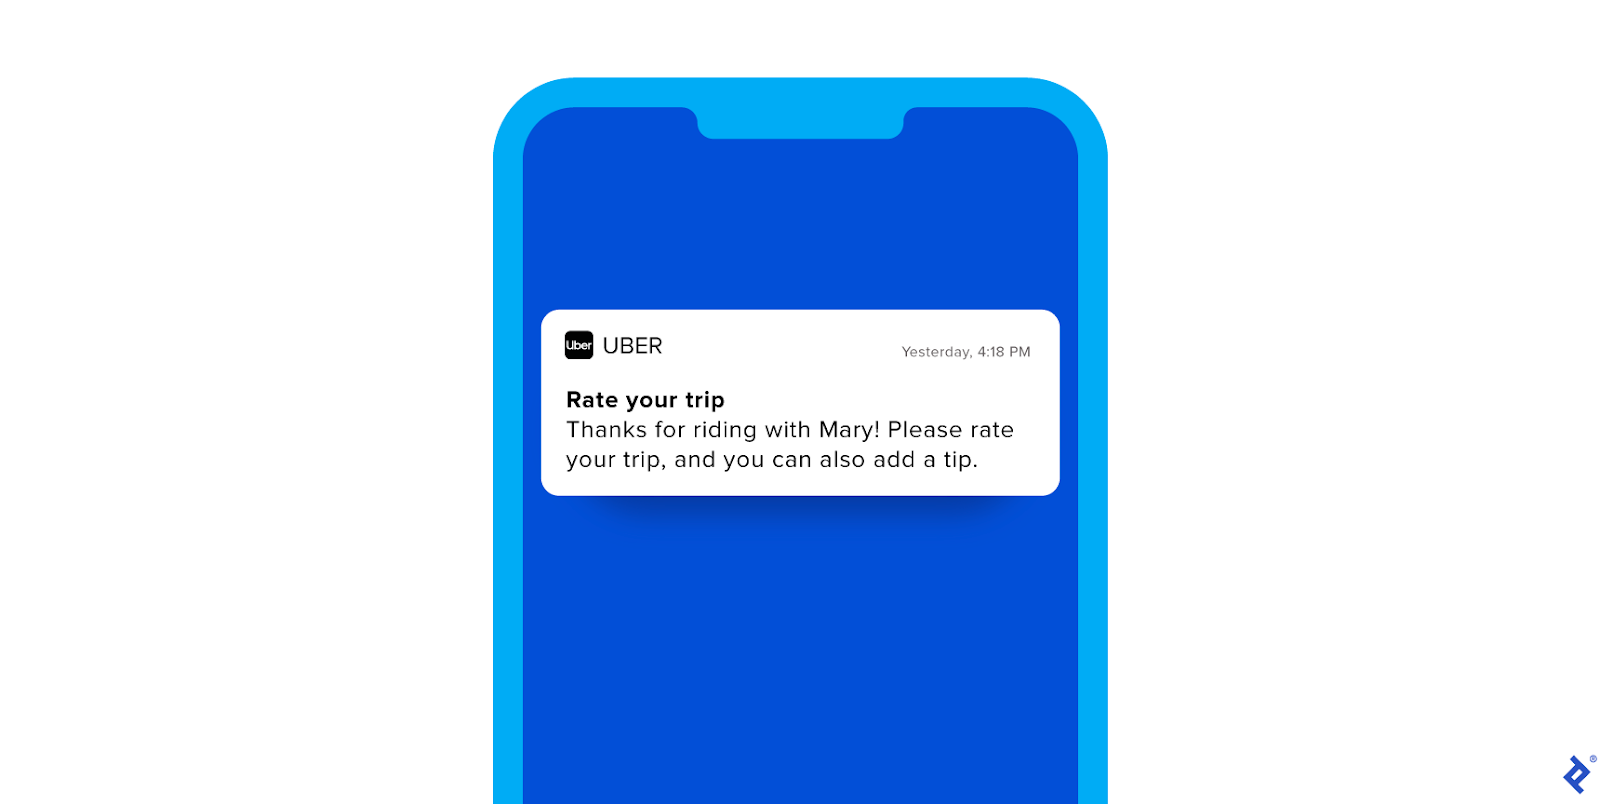 An illustration of a blue mobile phone, with an image of a push notification from Uber. The headline reads “Rate your trip” and the body reads “Thanks for riding with Mary! Please rate your trip, and you can also add a tip.”